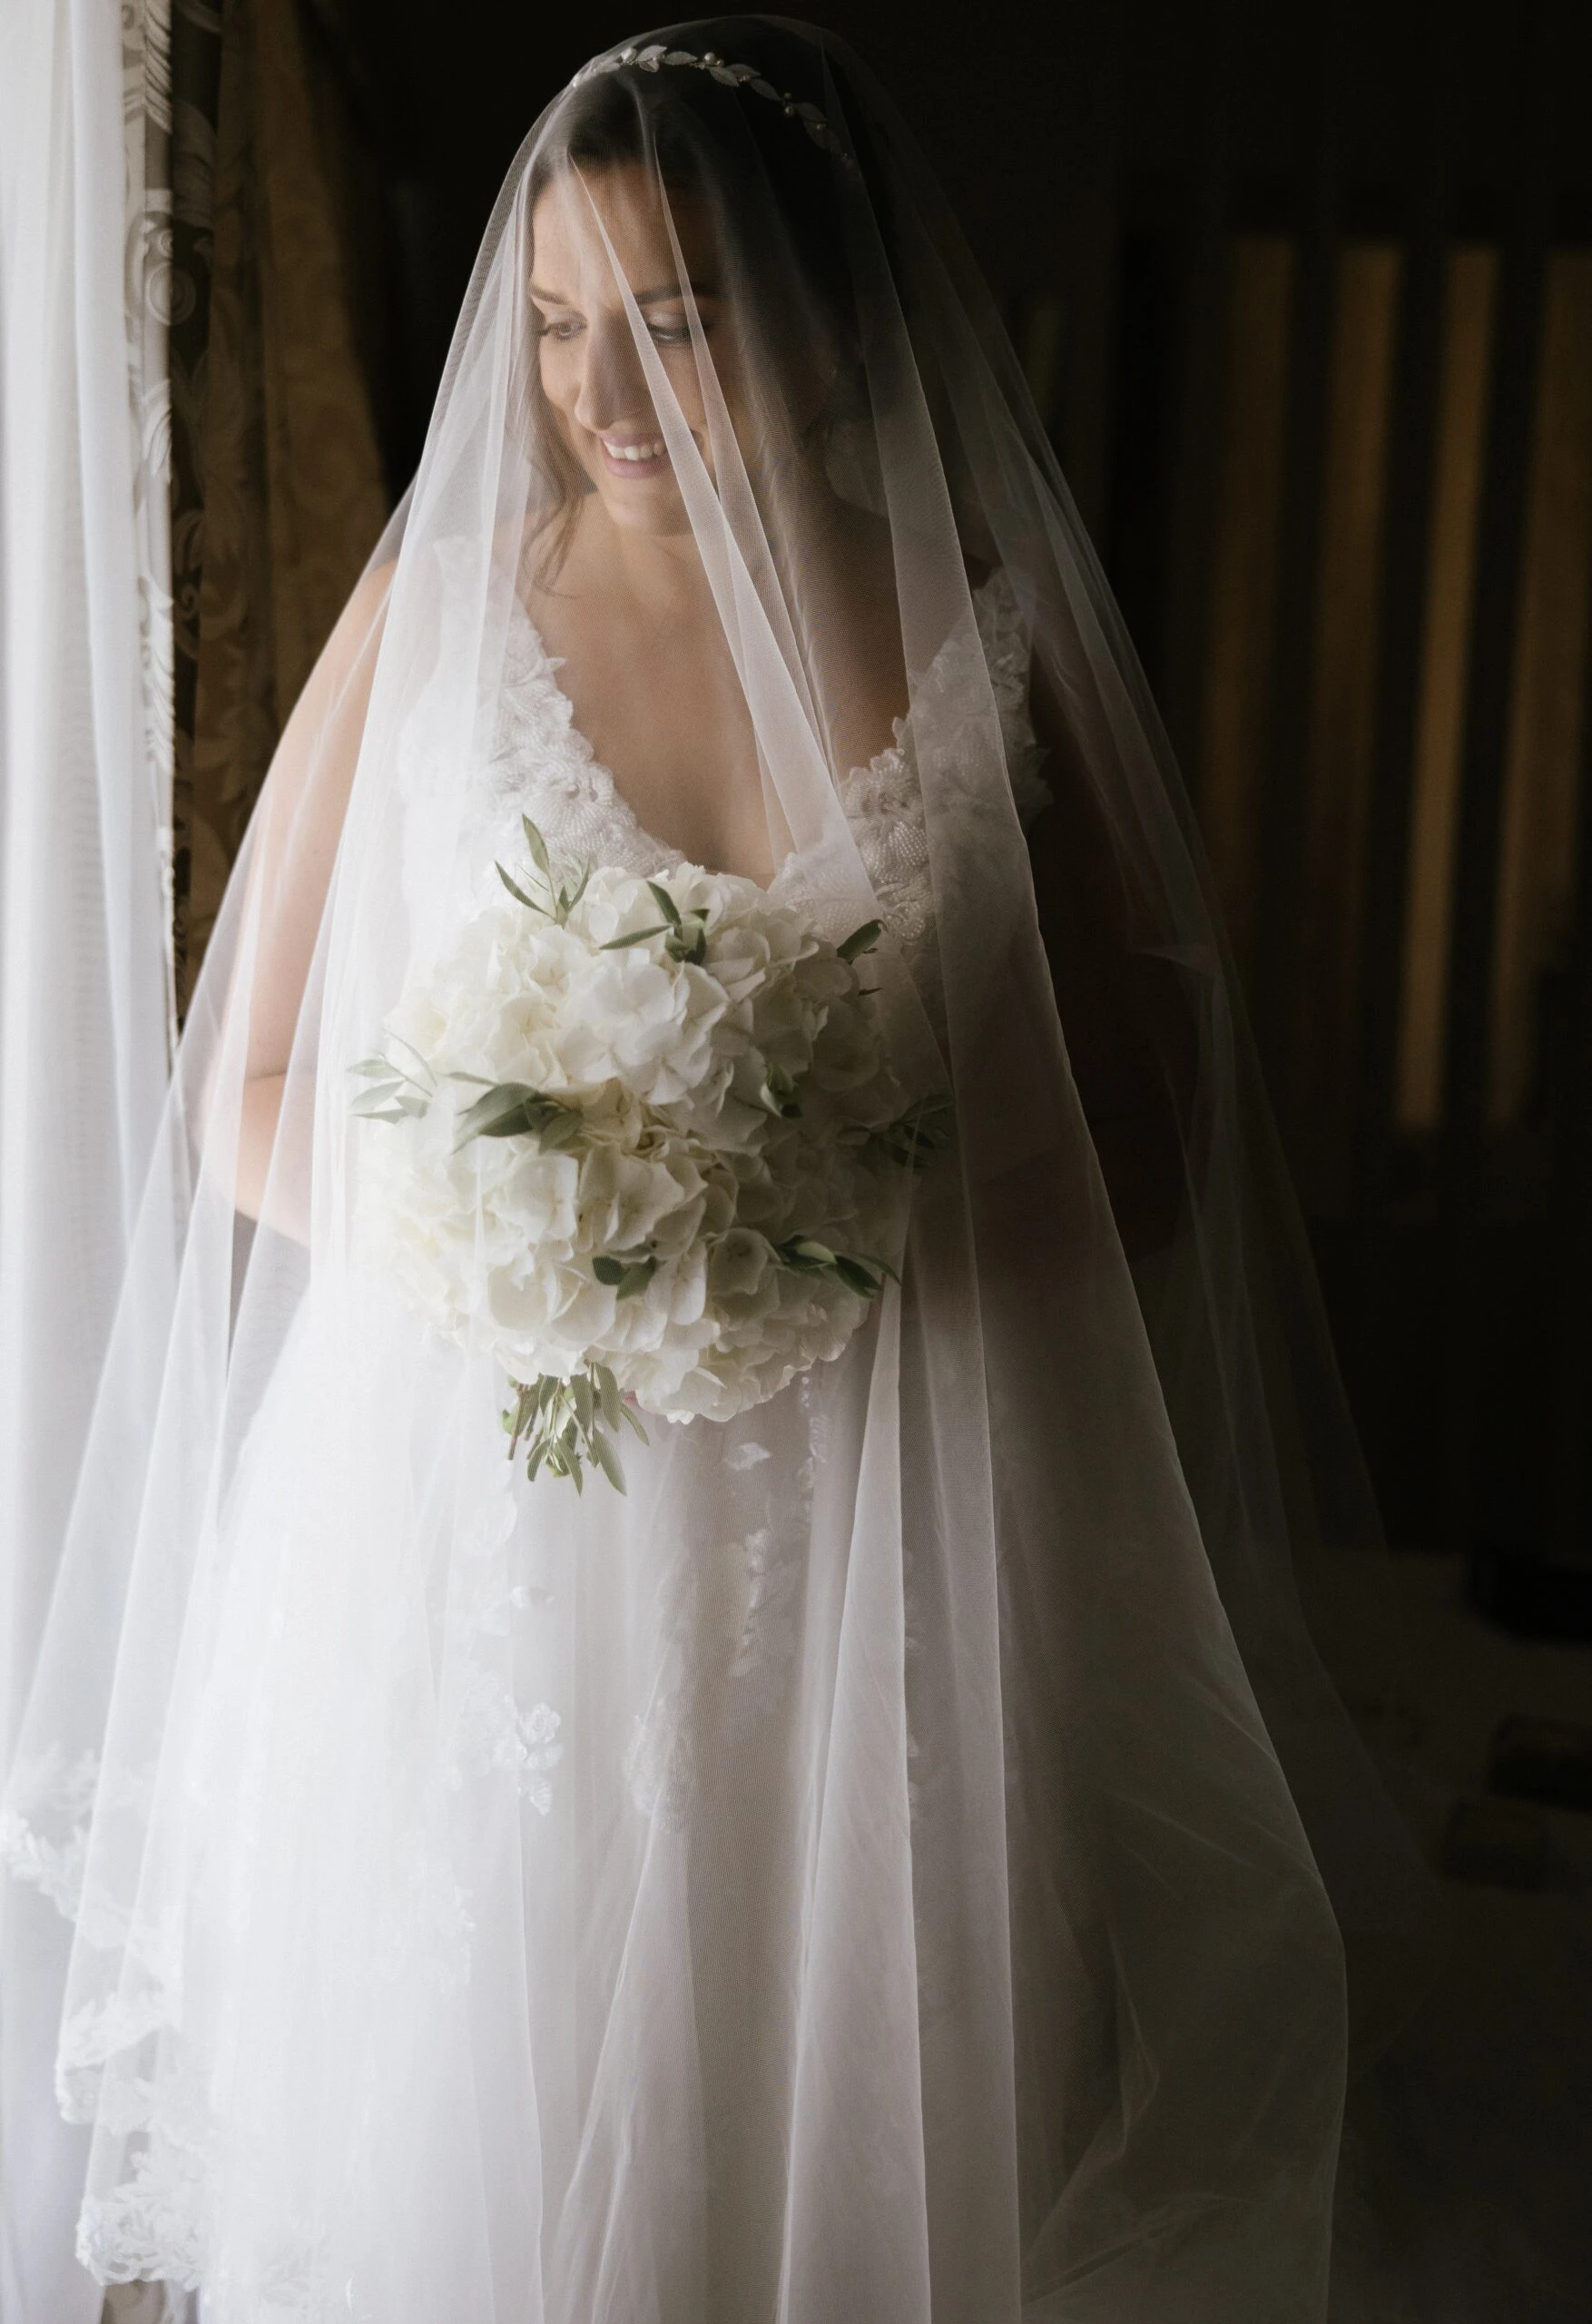 Bride wearing a wedding dress and veil holding flowers